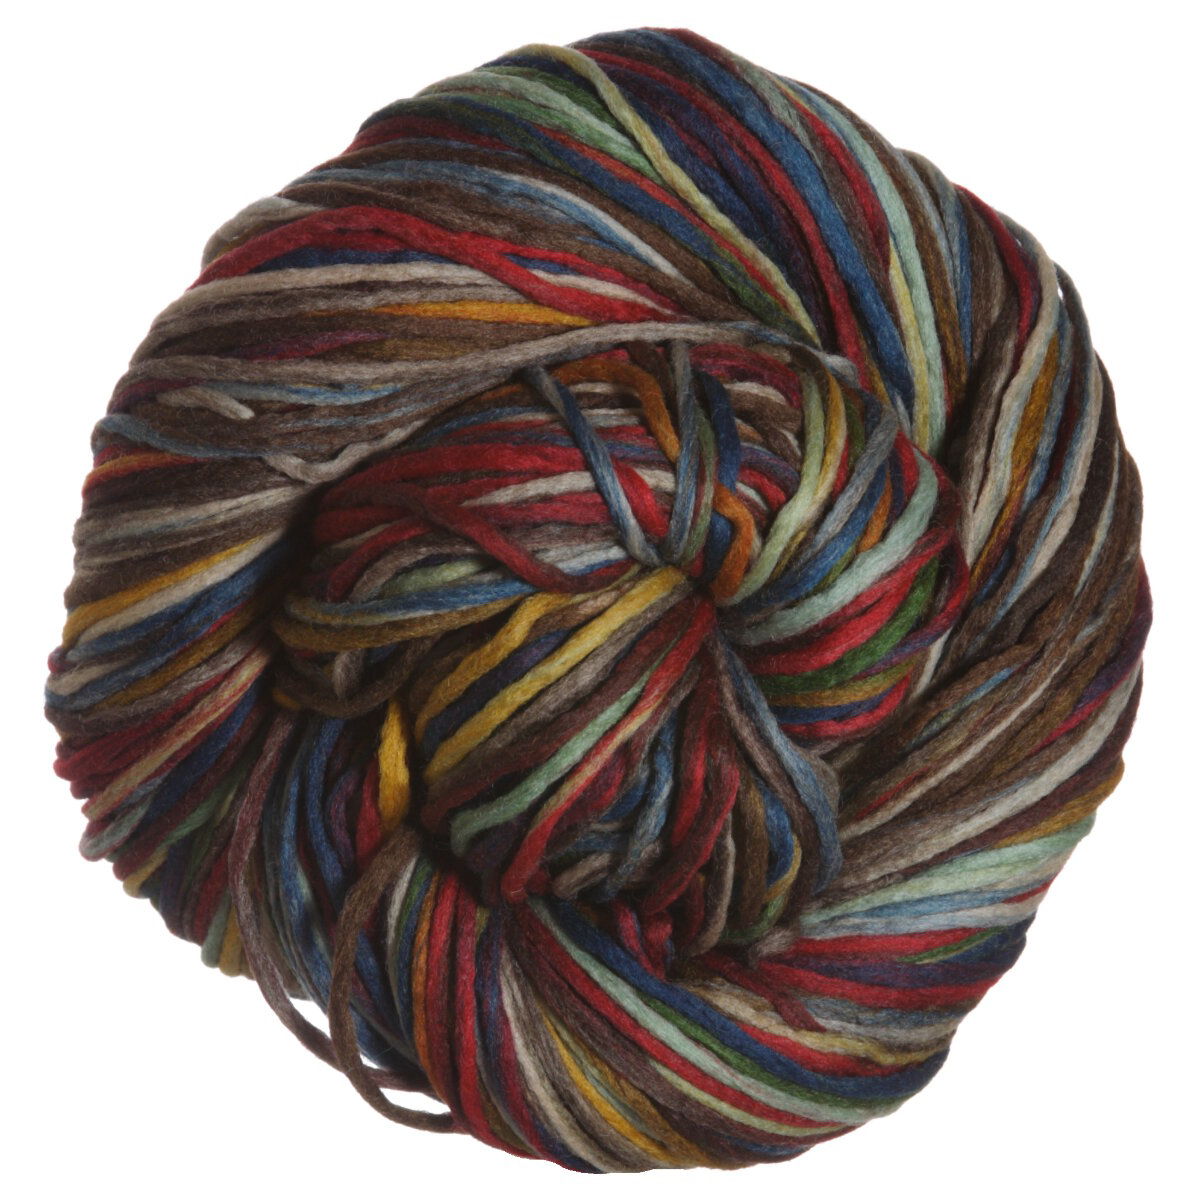 Schoppel Wolle Pur Yarn Reviews.